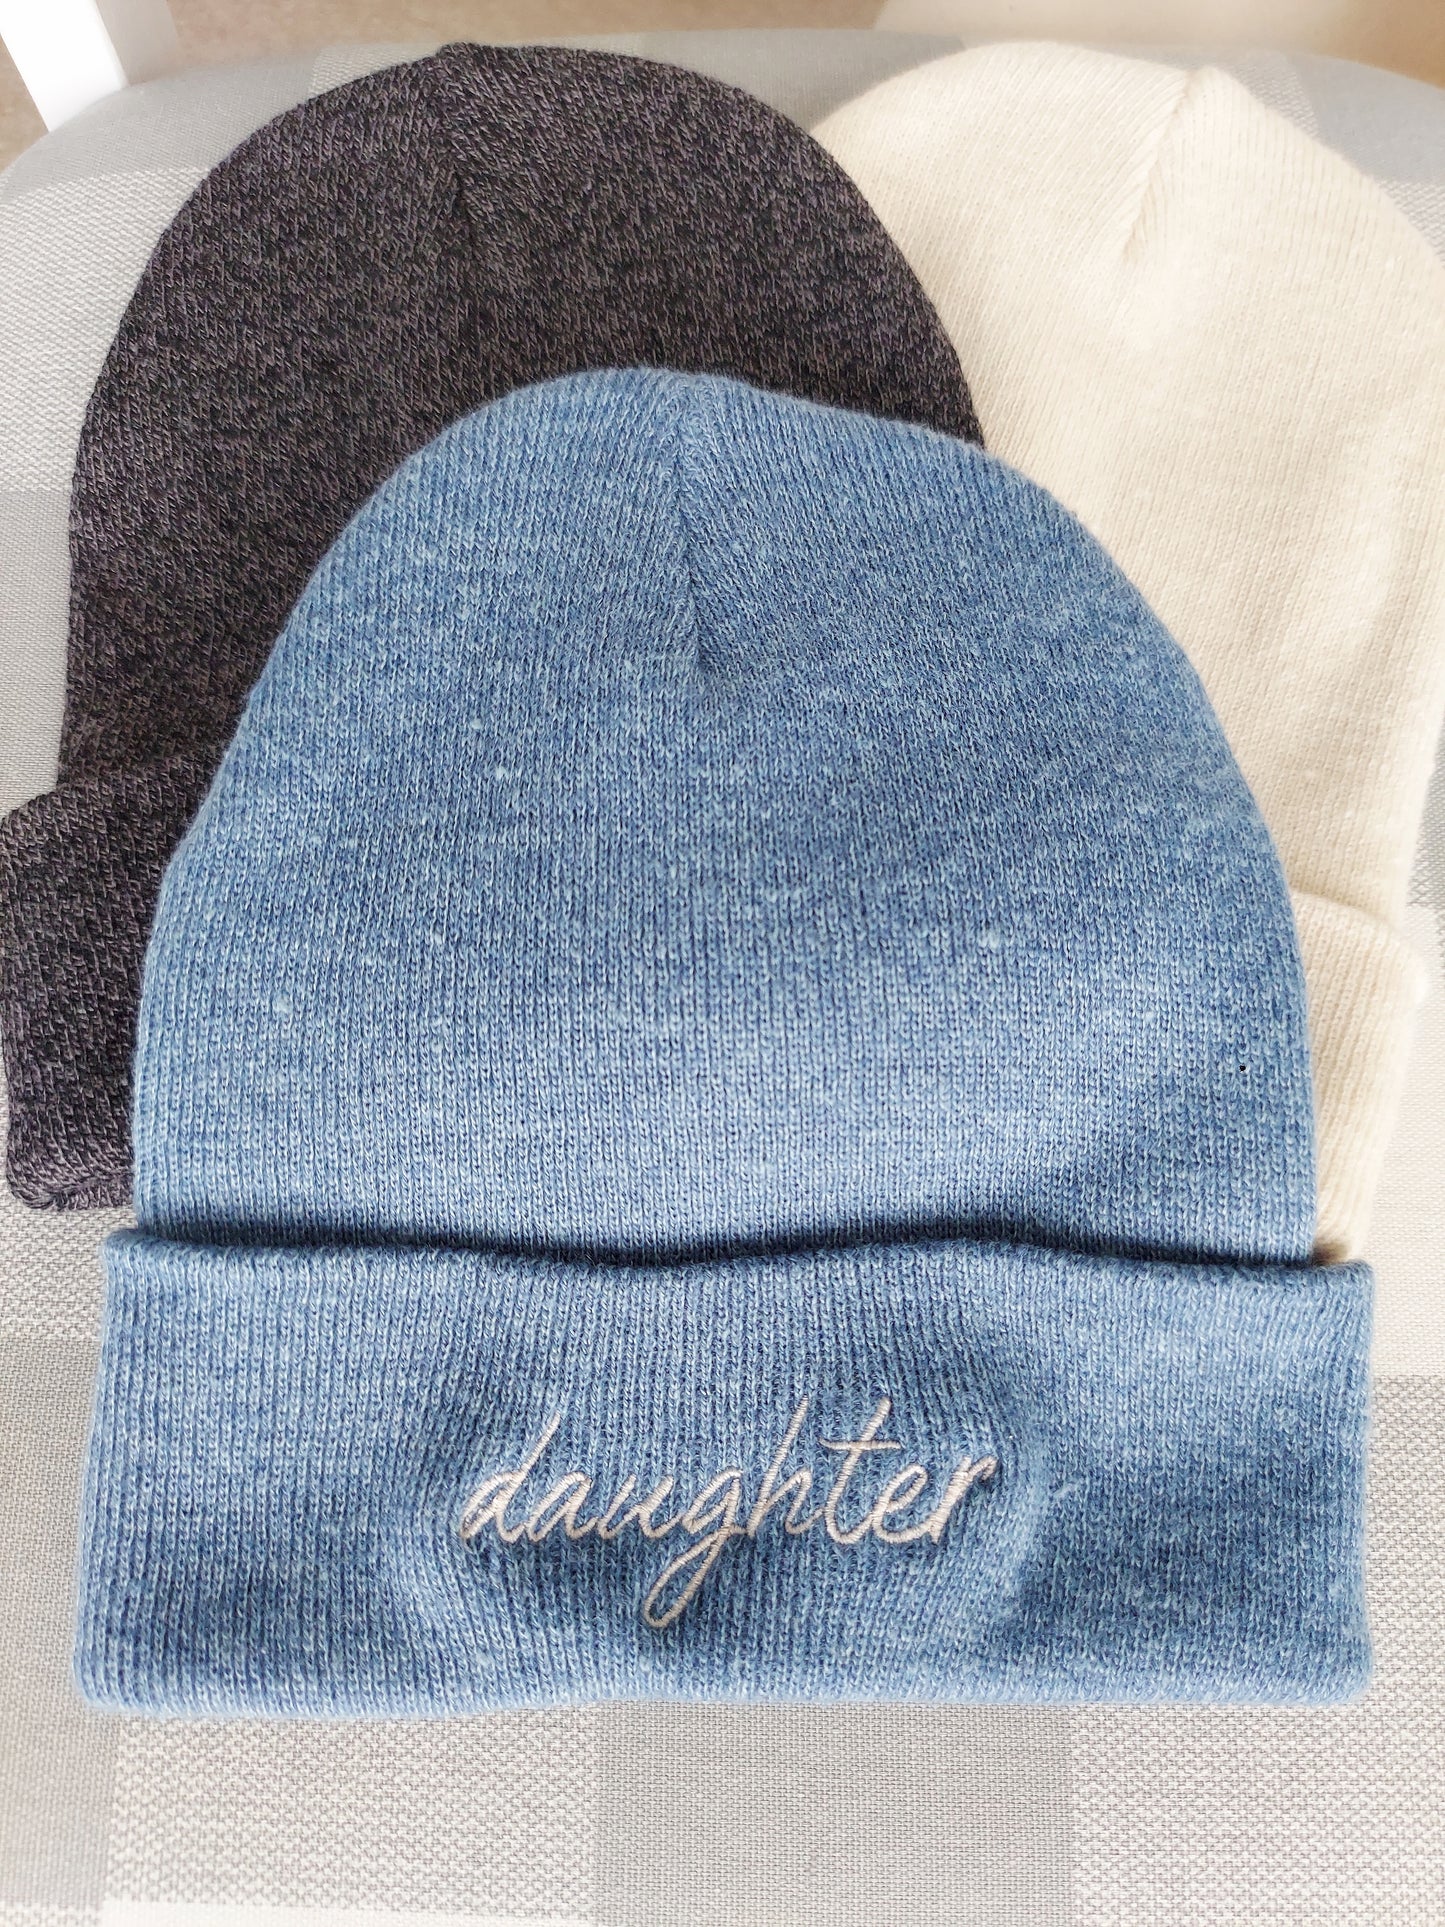 3:16 / Embroidered Beanie